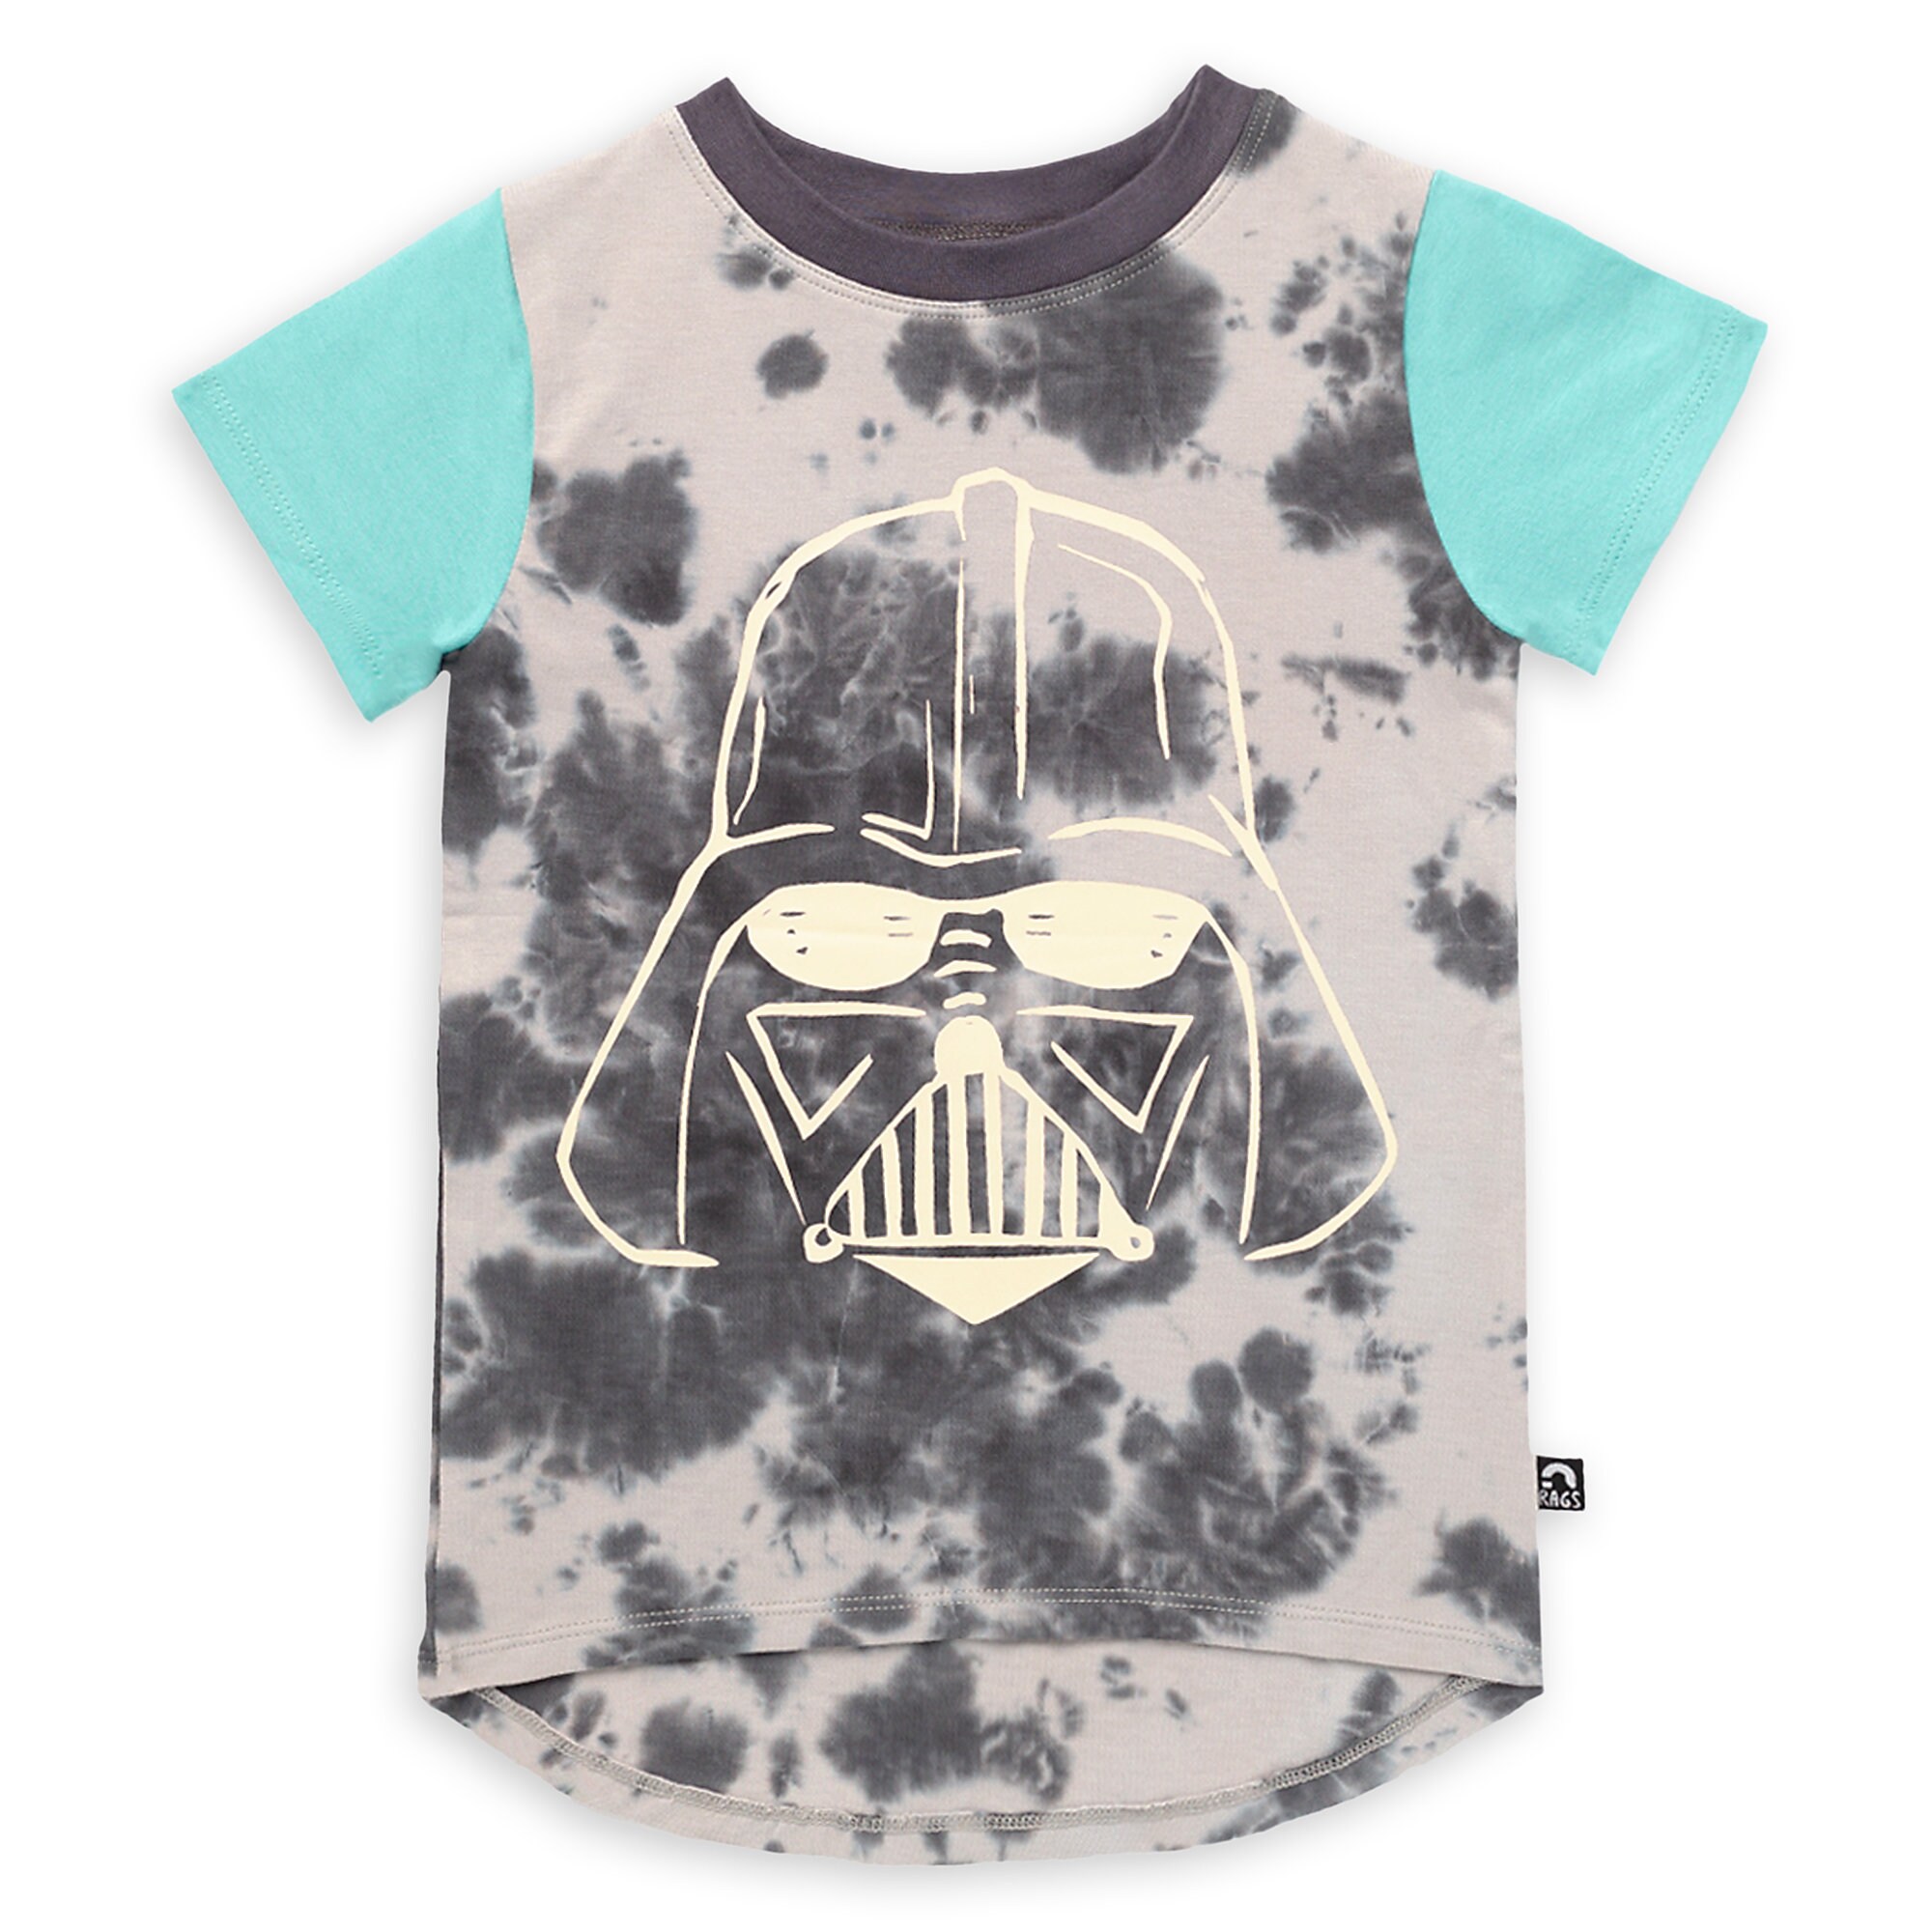 Darth Vader T-Shirt for Toddler and Kids by Rags